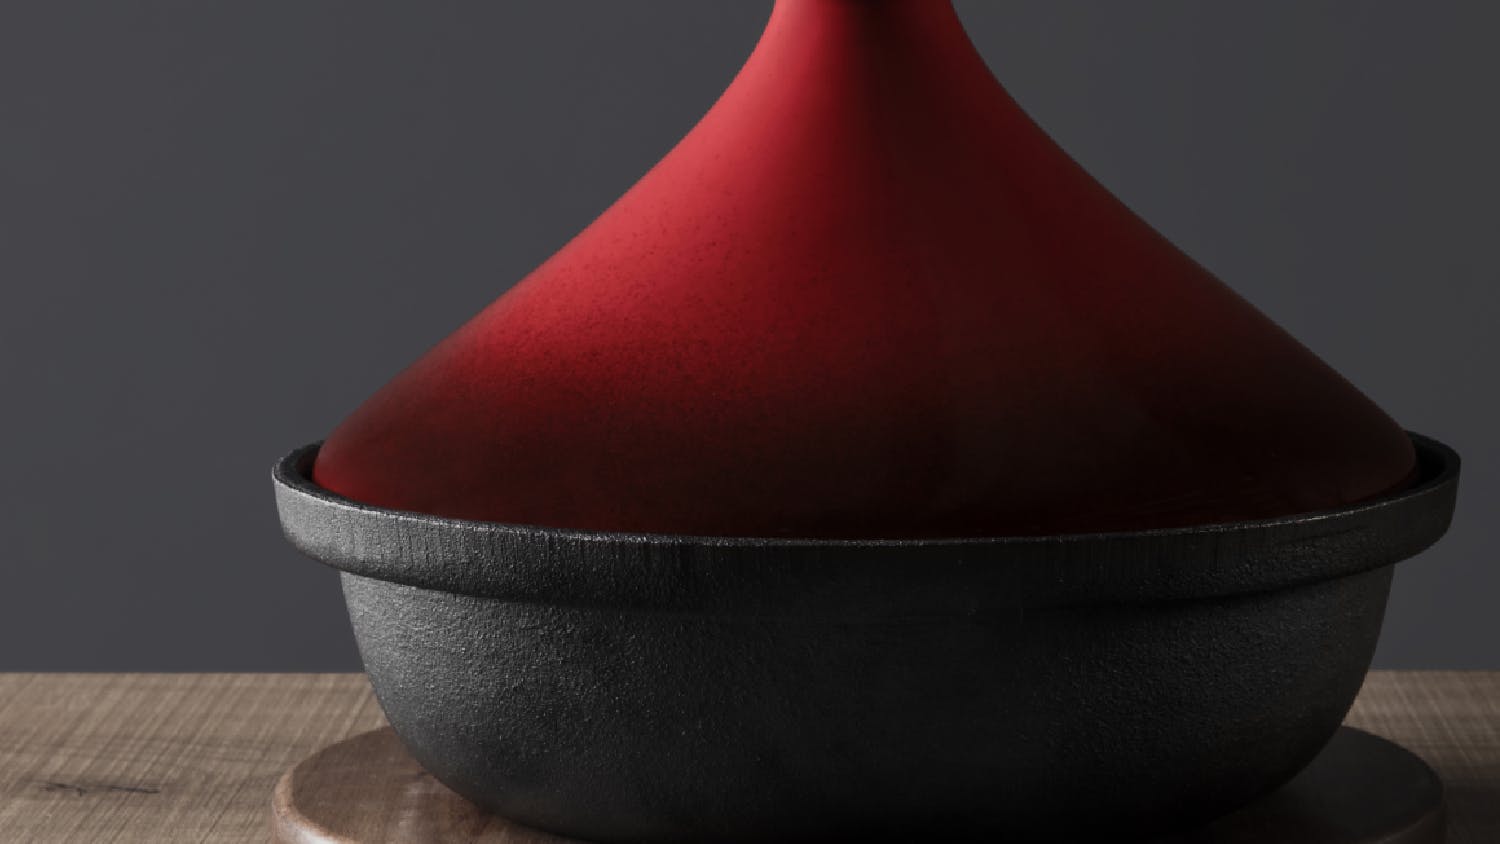 Gourmet Kitchen Cast Iron Tagine w/ Ceramic Lid - Ombre Red